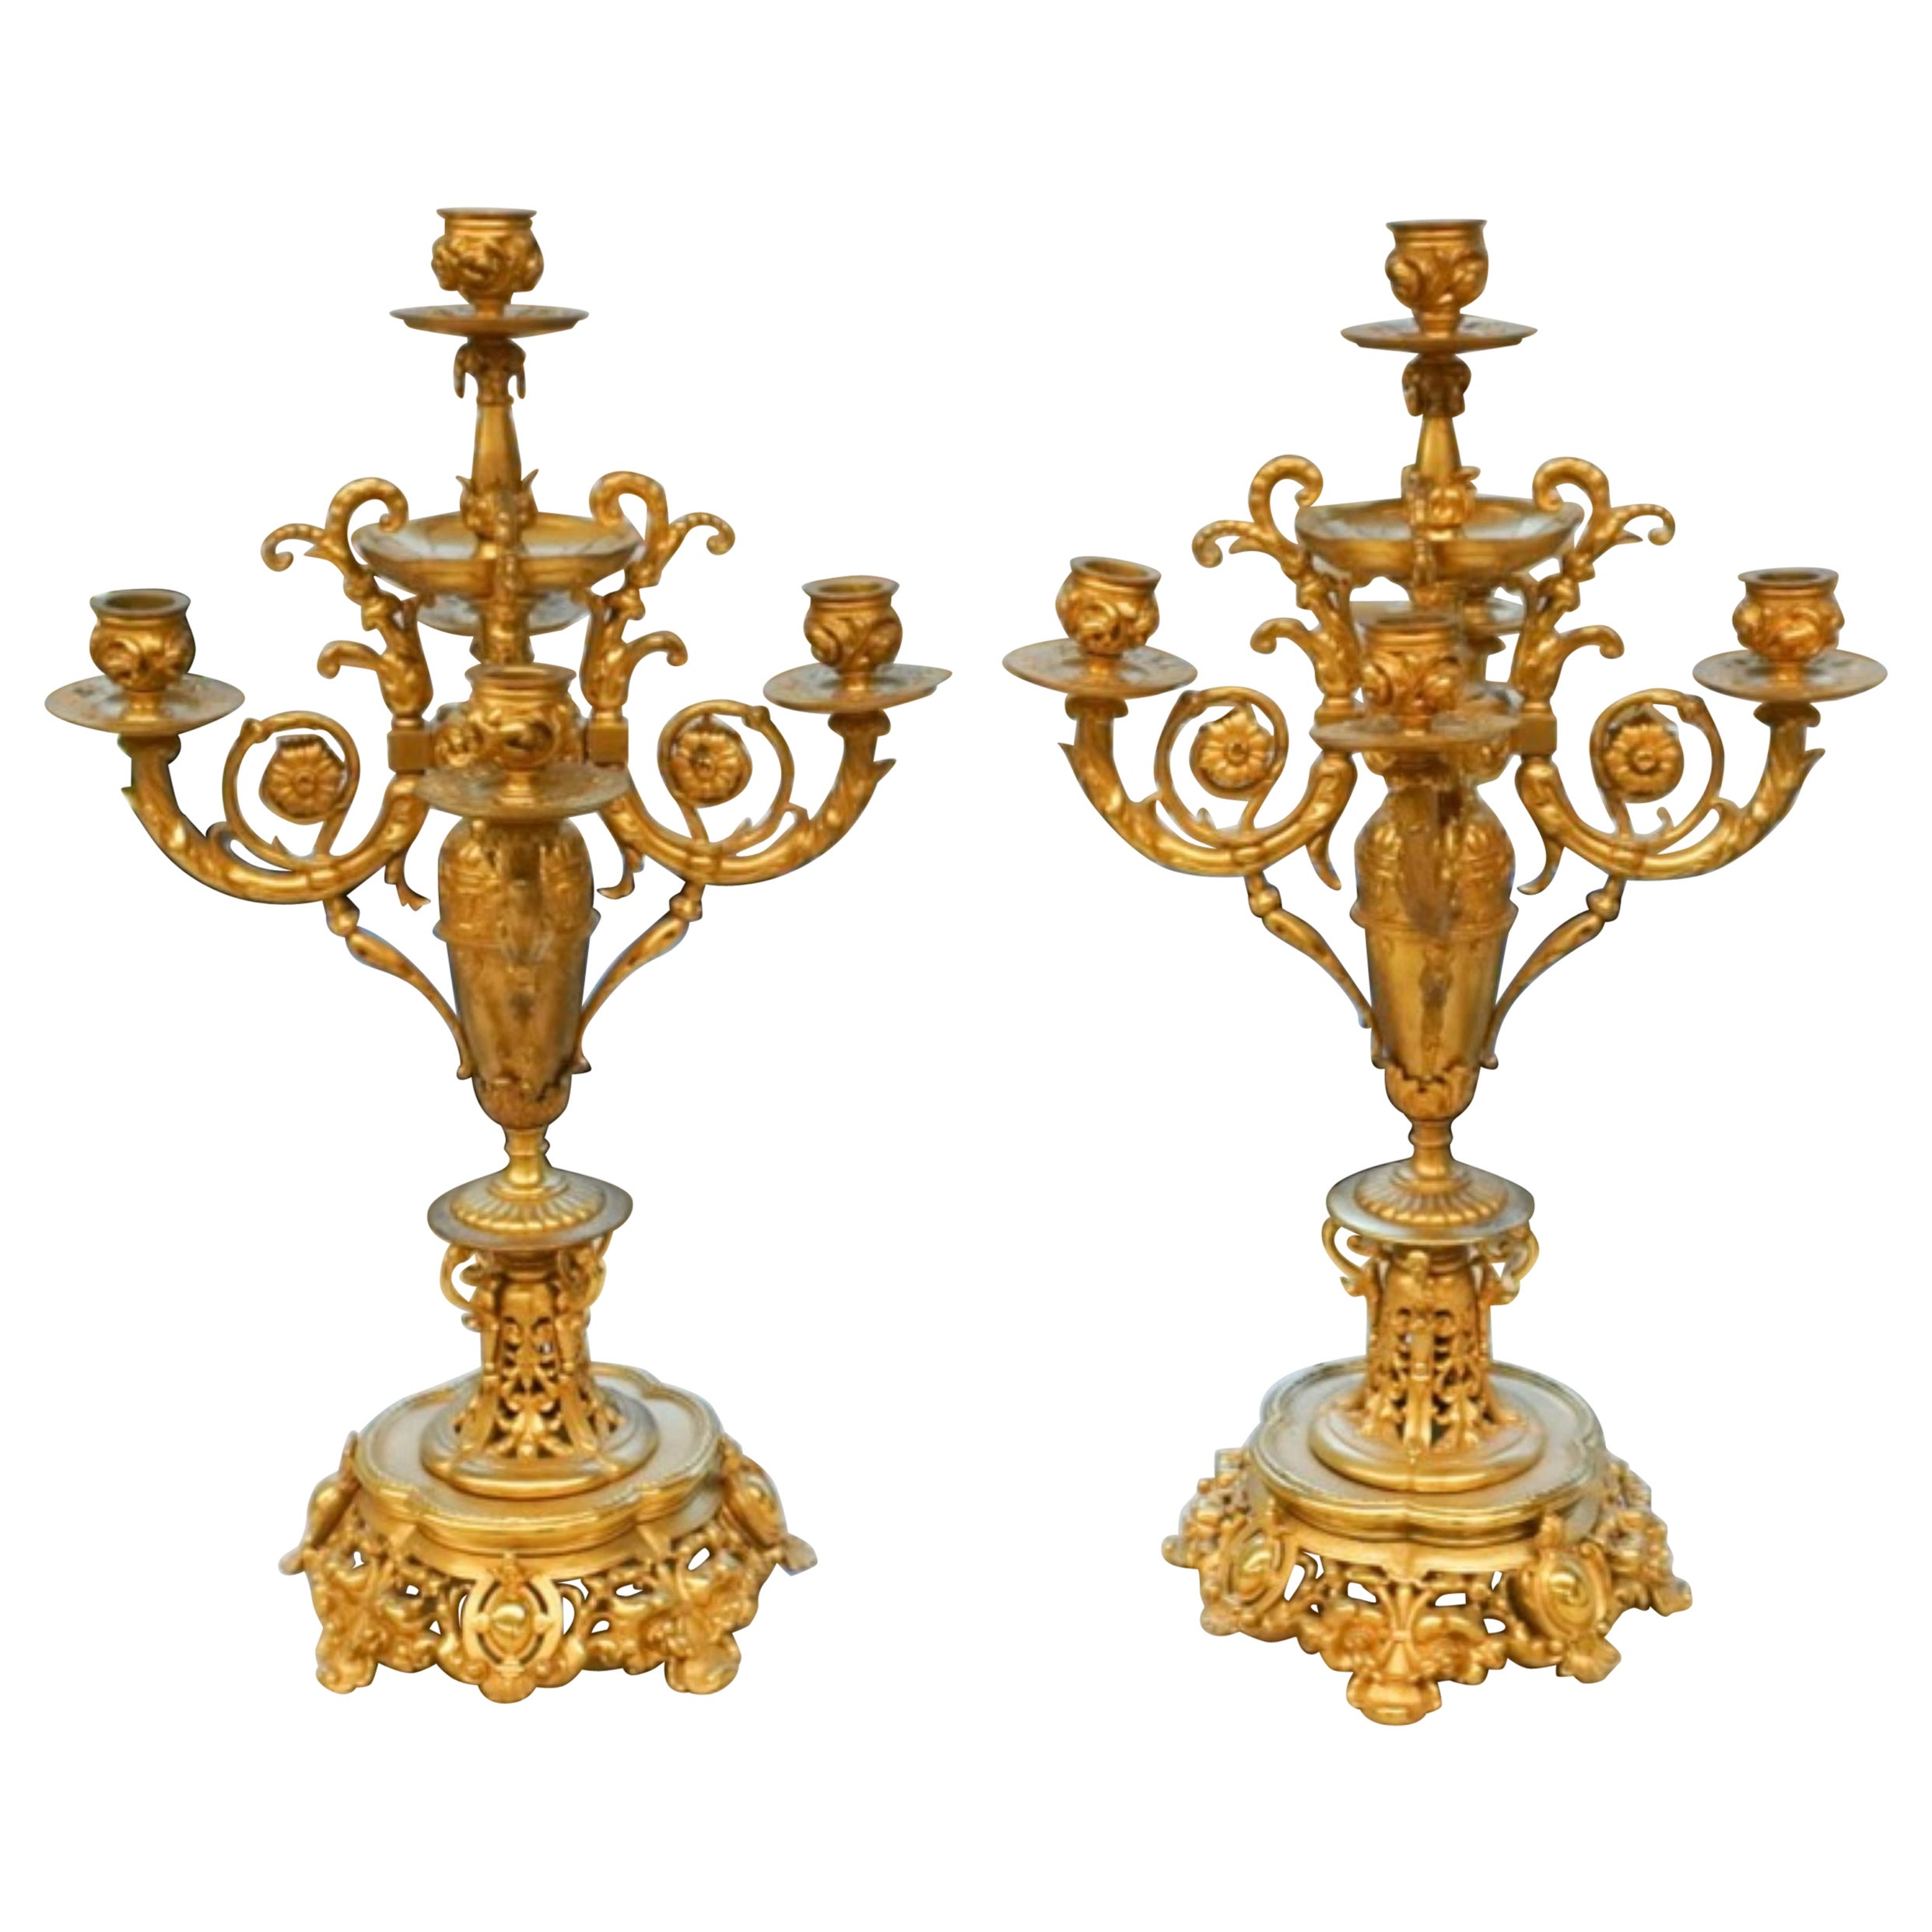 Pair Of Louis XV Style Ormolu Five-Light Candelabras, 20th Century For Sale